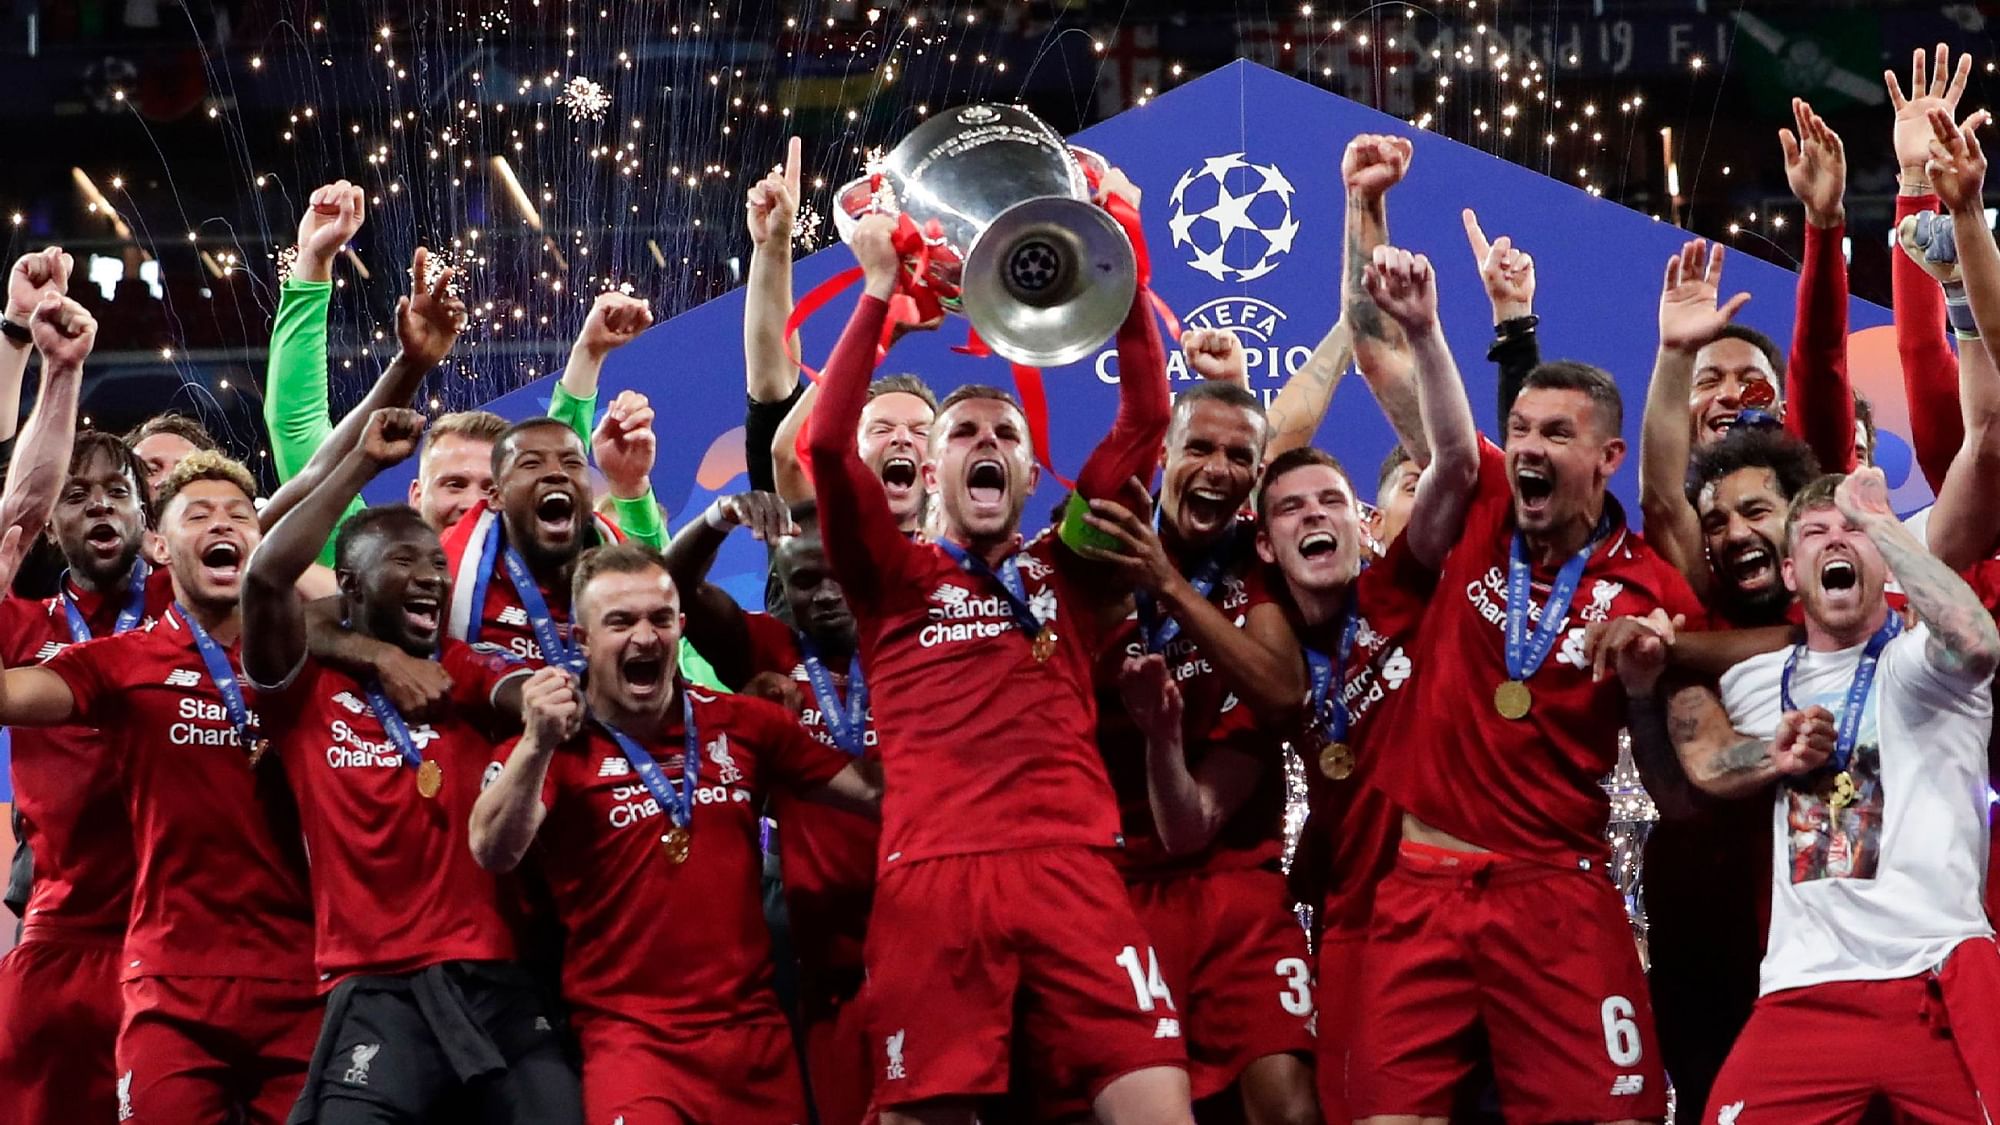 Liverpool won their sixth European title with a 2-0 win against Totteham Hotspur in the Champions League final.